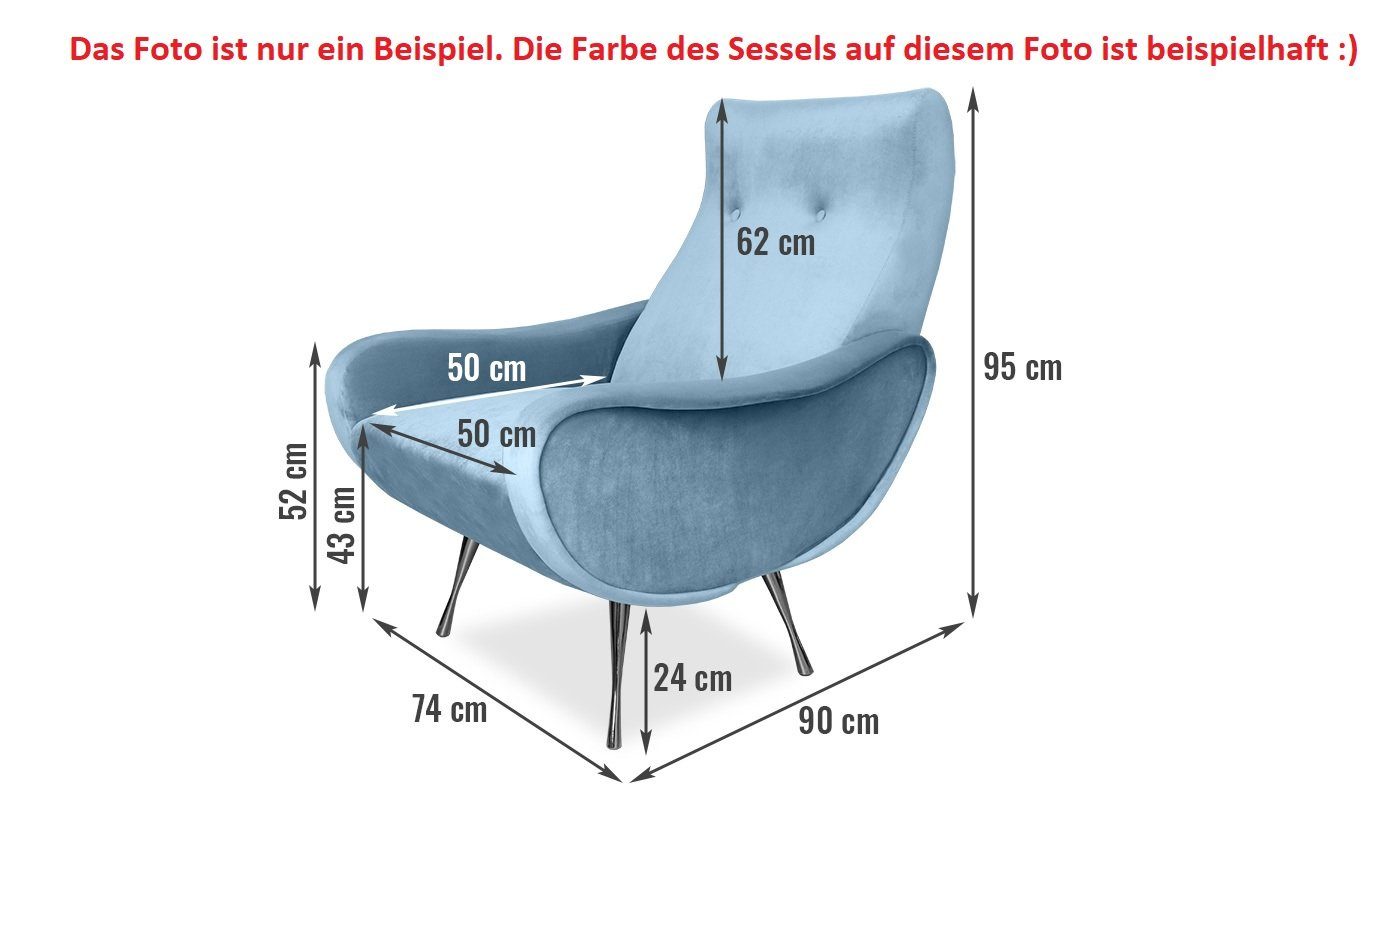 Lesesessel ROYAL Sessel, TV-Sessel pressiode Grau Couchsessel, Fernsehsessel, Relaxsessel,